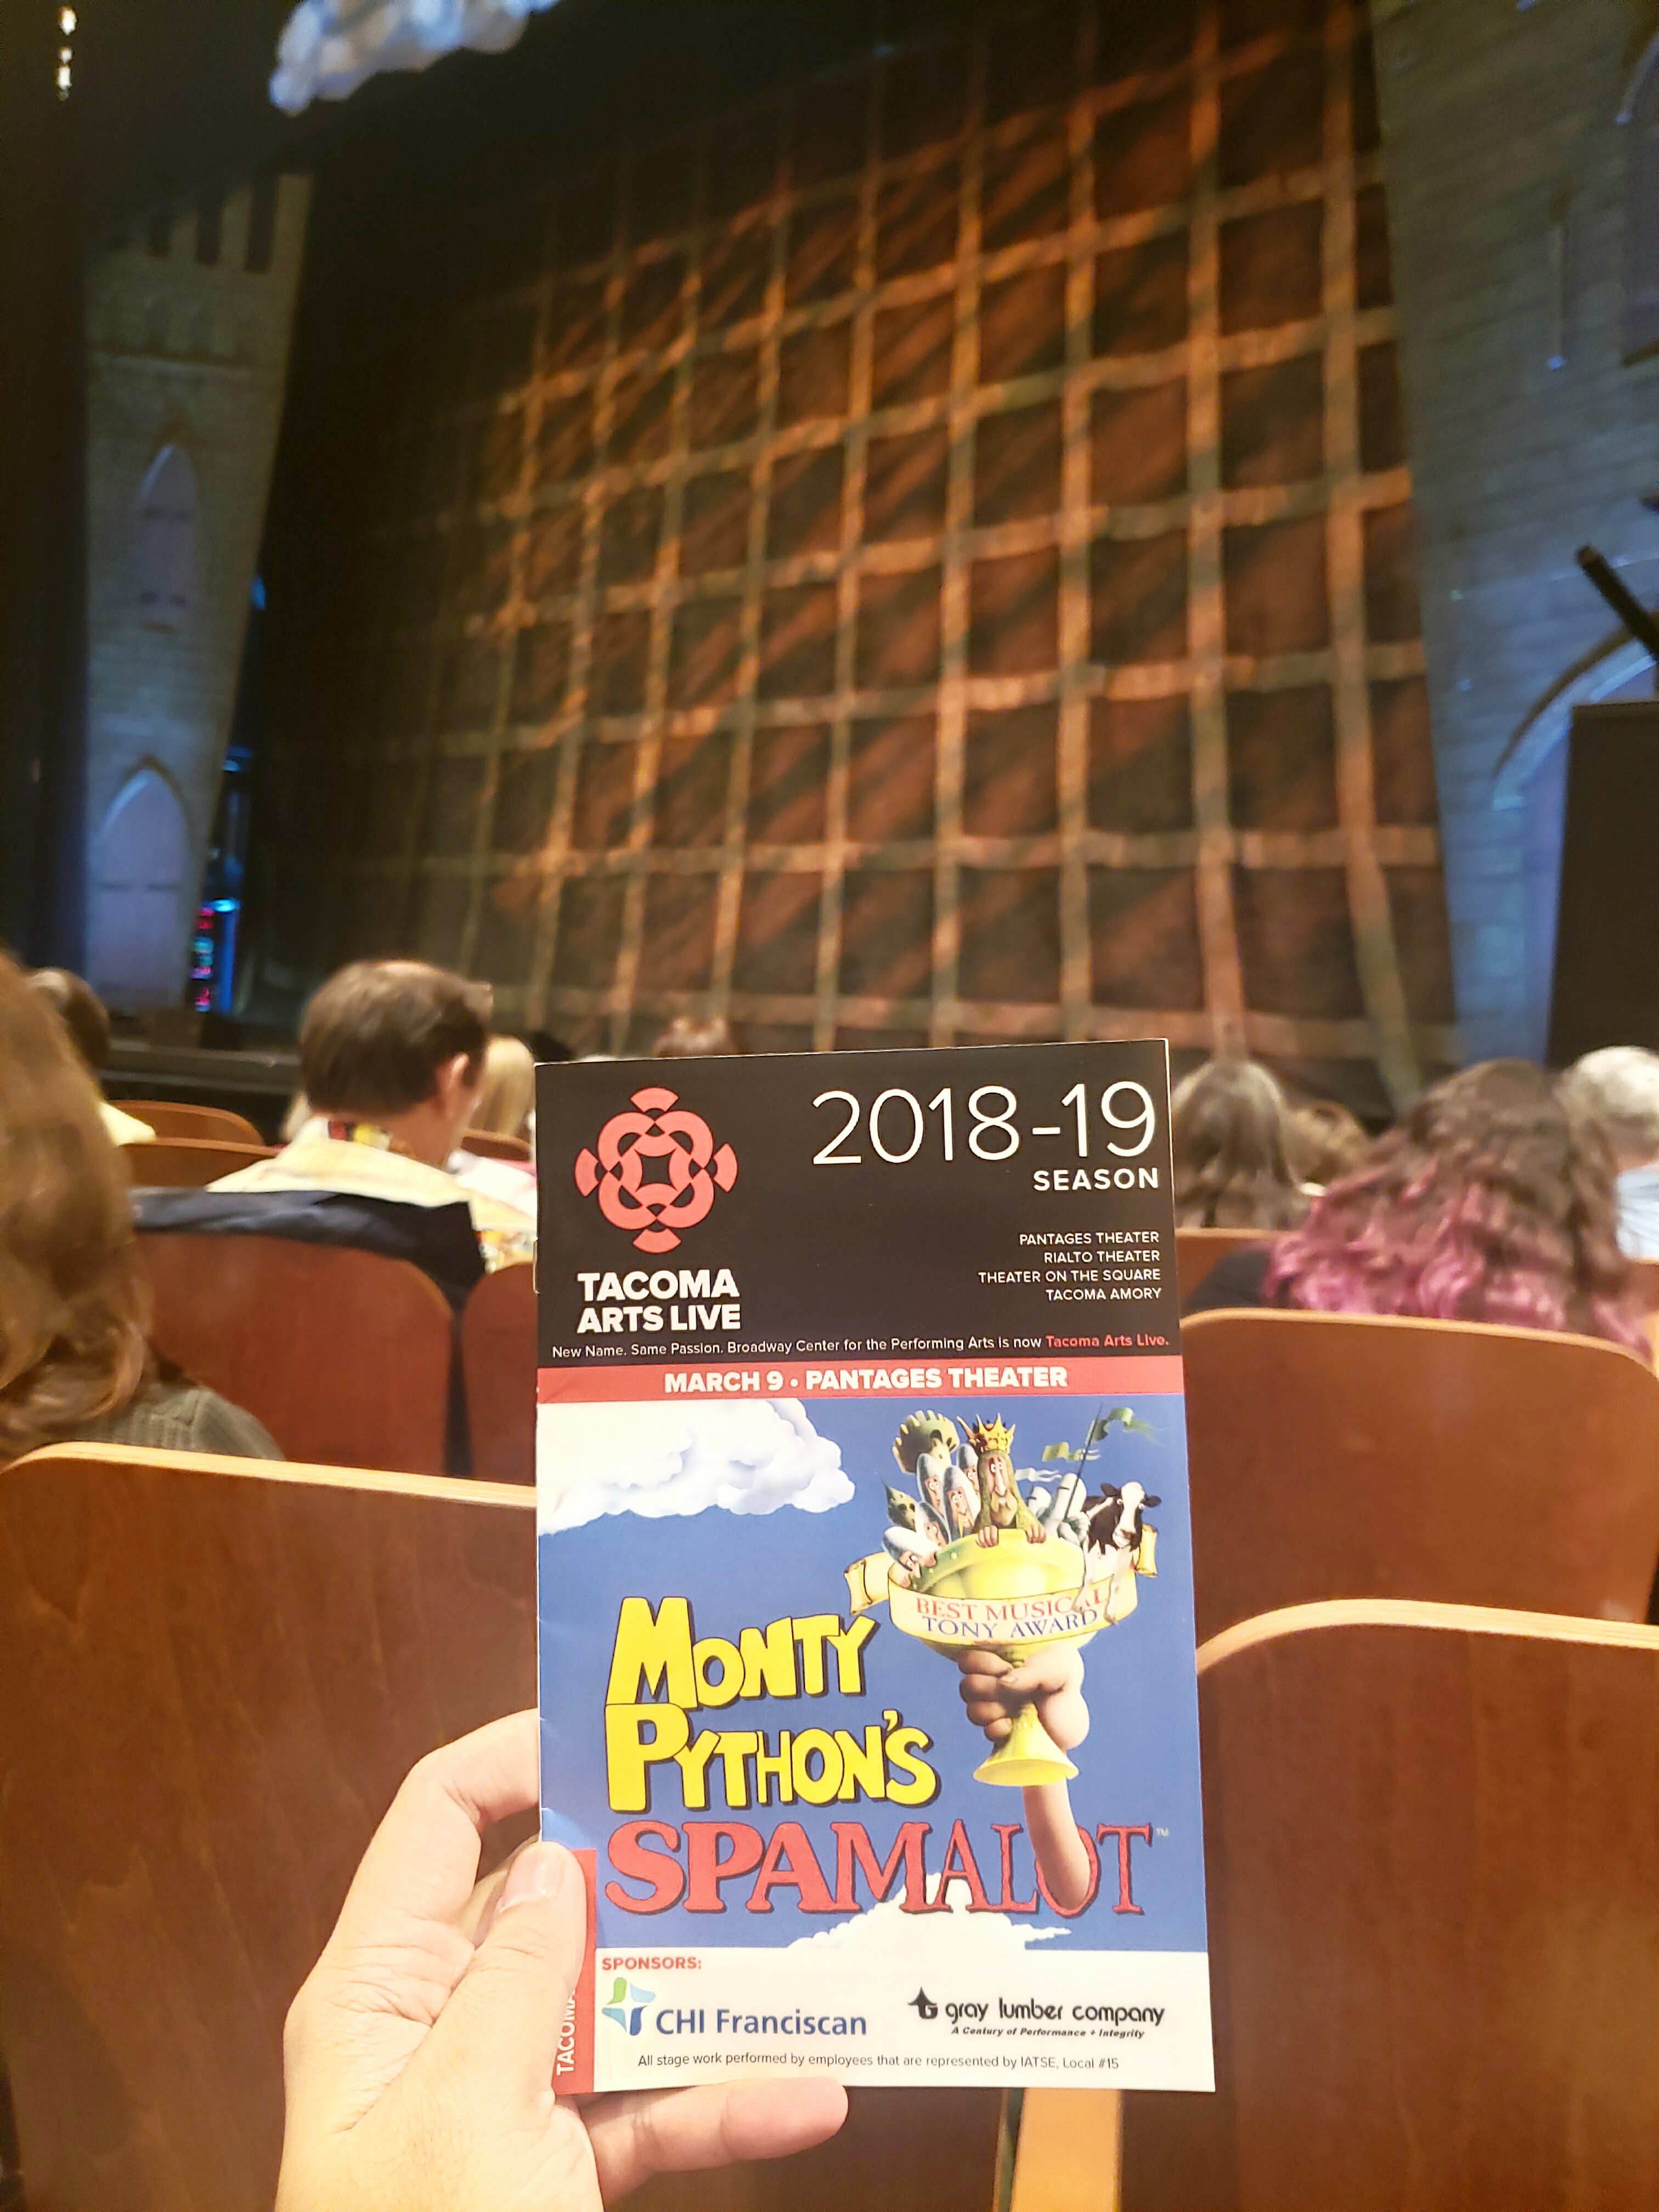 #OneDayOnly run of @MontyPython's @TheTonyAwards-winning #musical @SpamalotOnTour w/ dad at @TacomaArtsLive in #PantagesTheater. So close to the stage that I didn't know where to look! #English #slapstick #comedy. #AlwaysLookOnTheBrightSideOfLife #KingArthur #HolyGrail #Camelot